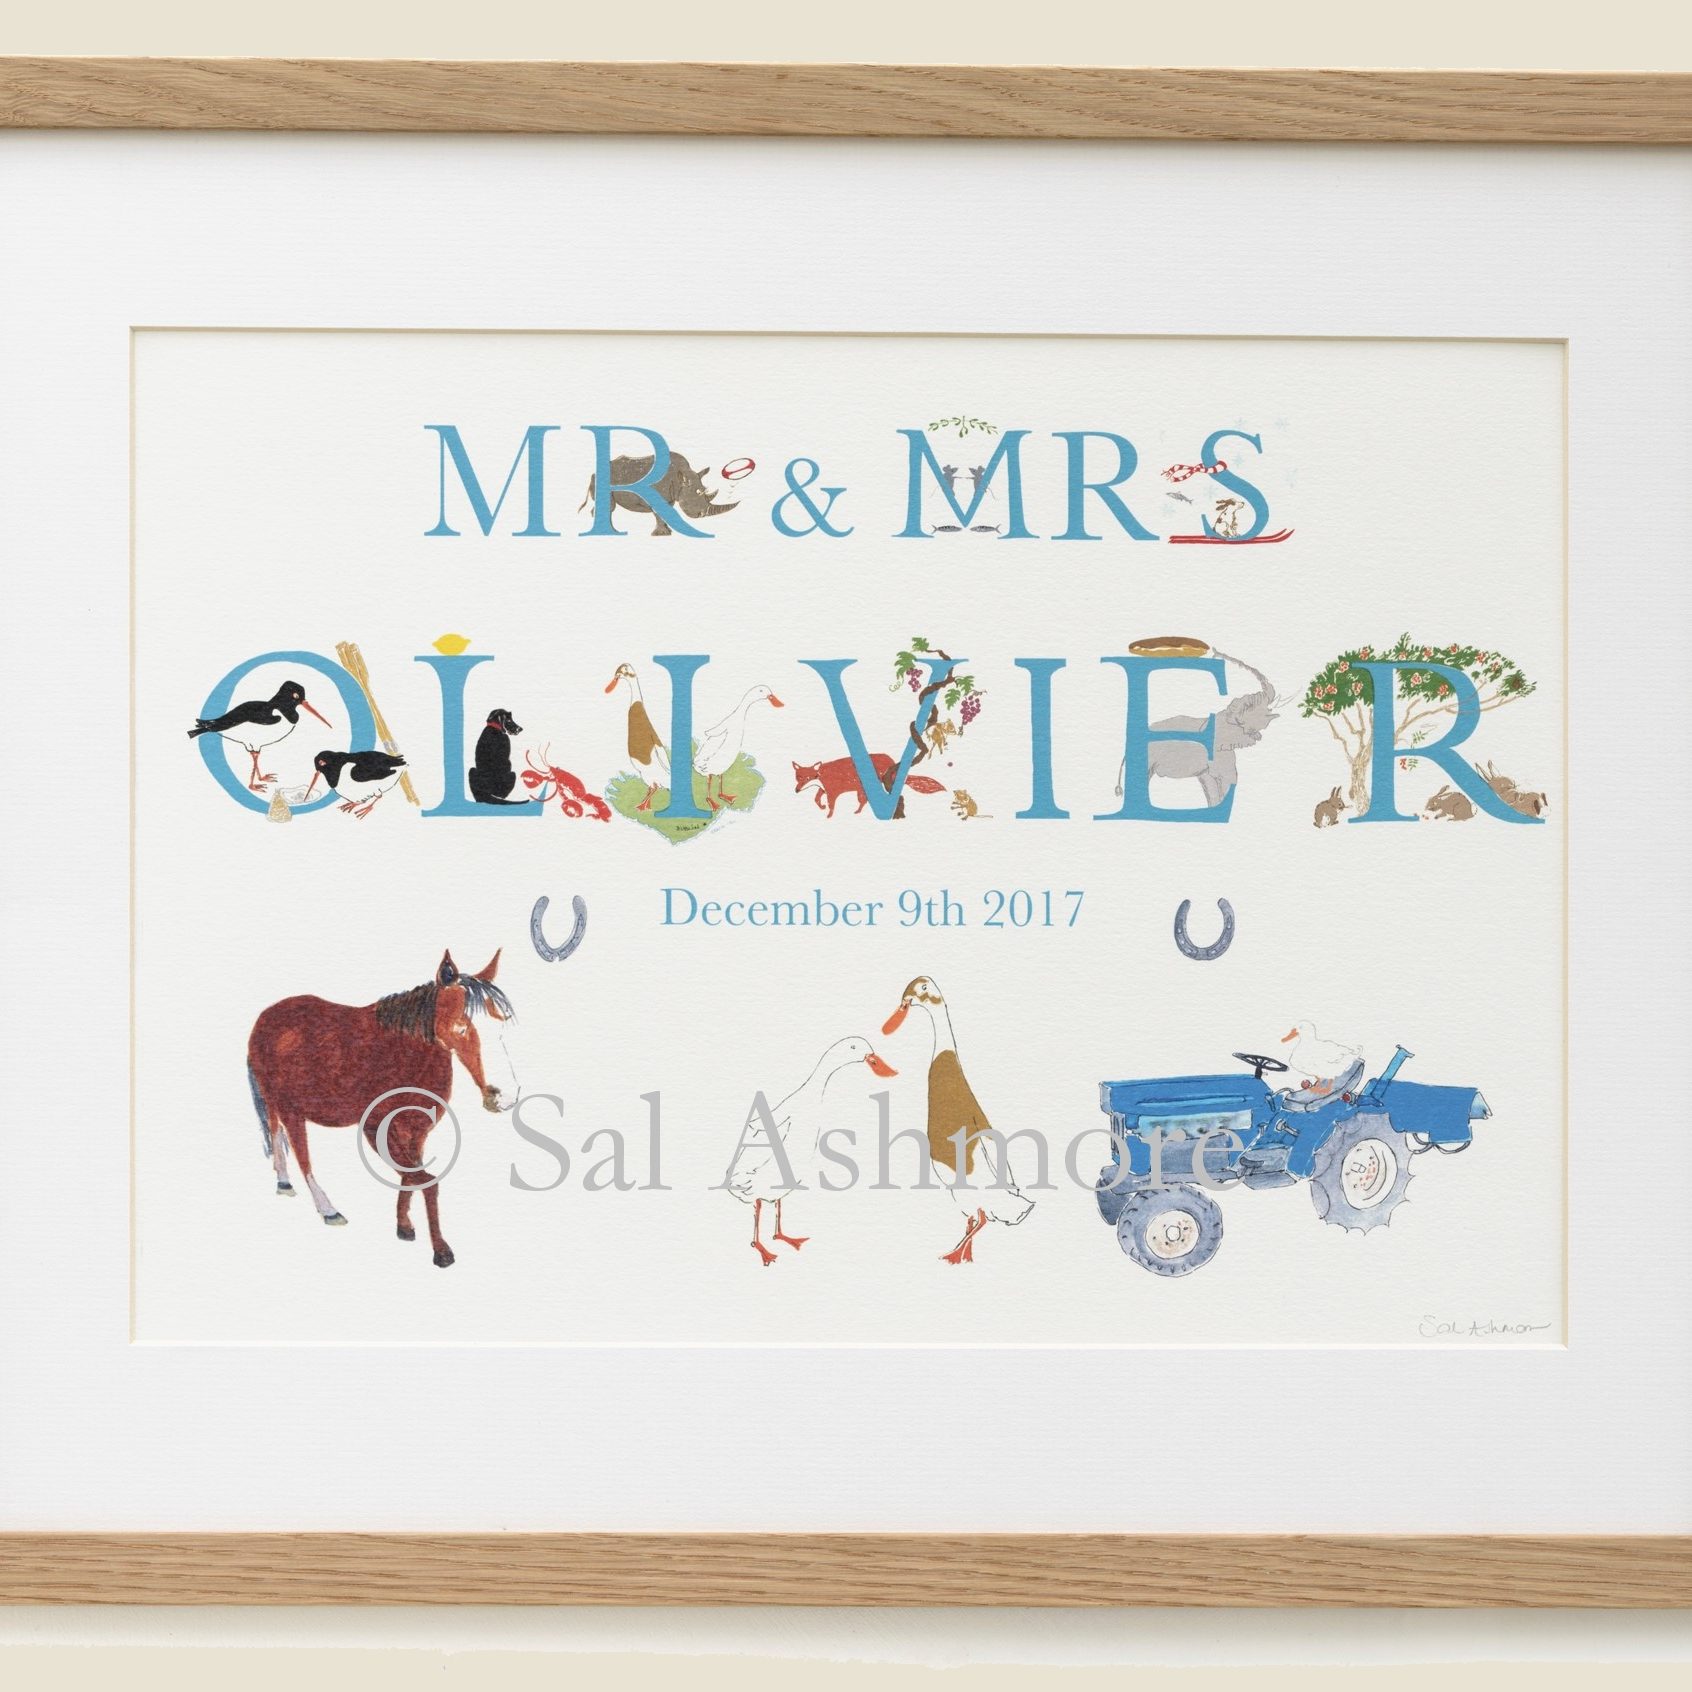 Personalised print to celebrate a wedding